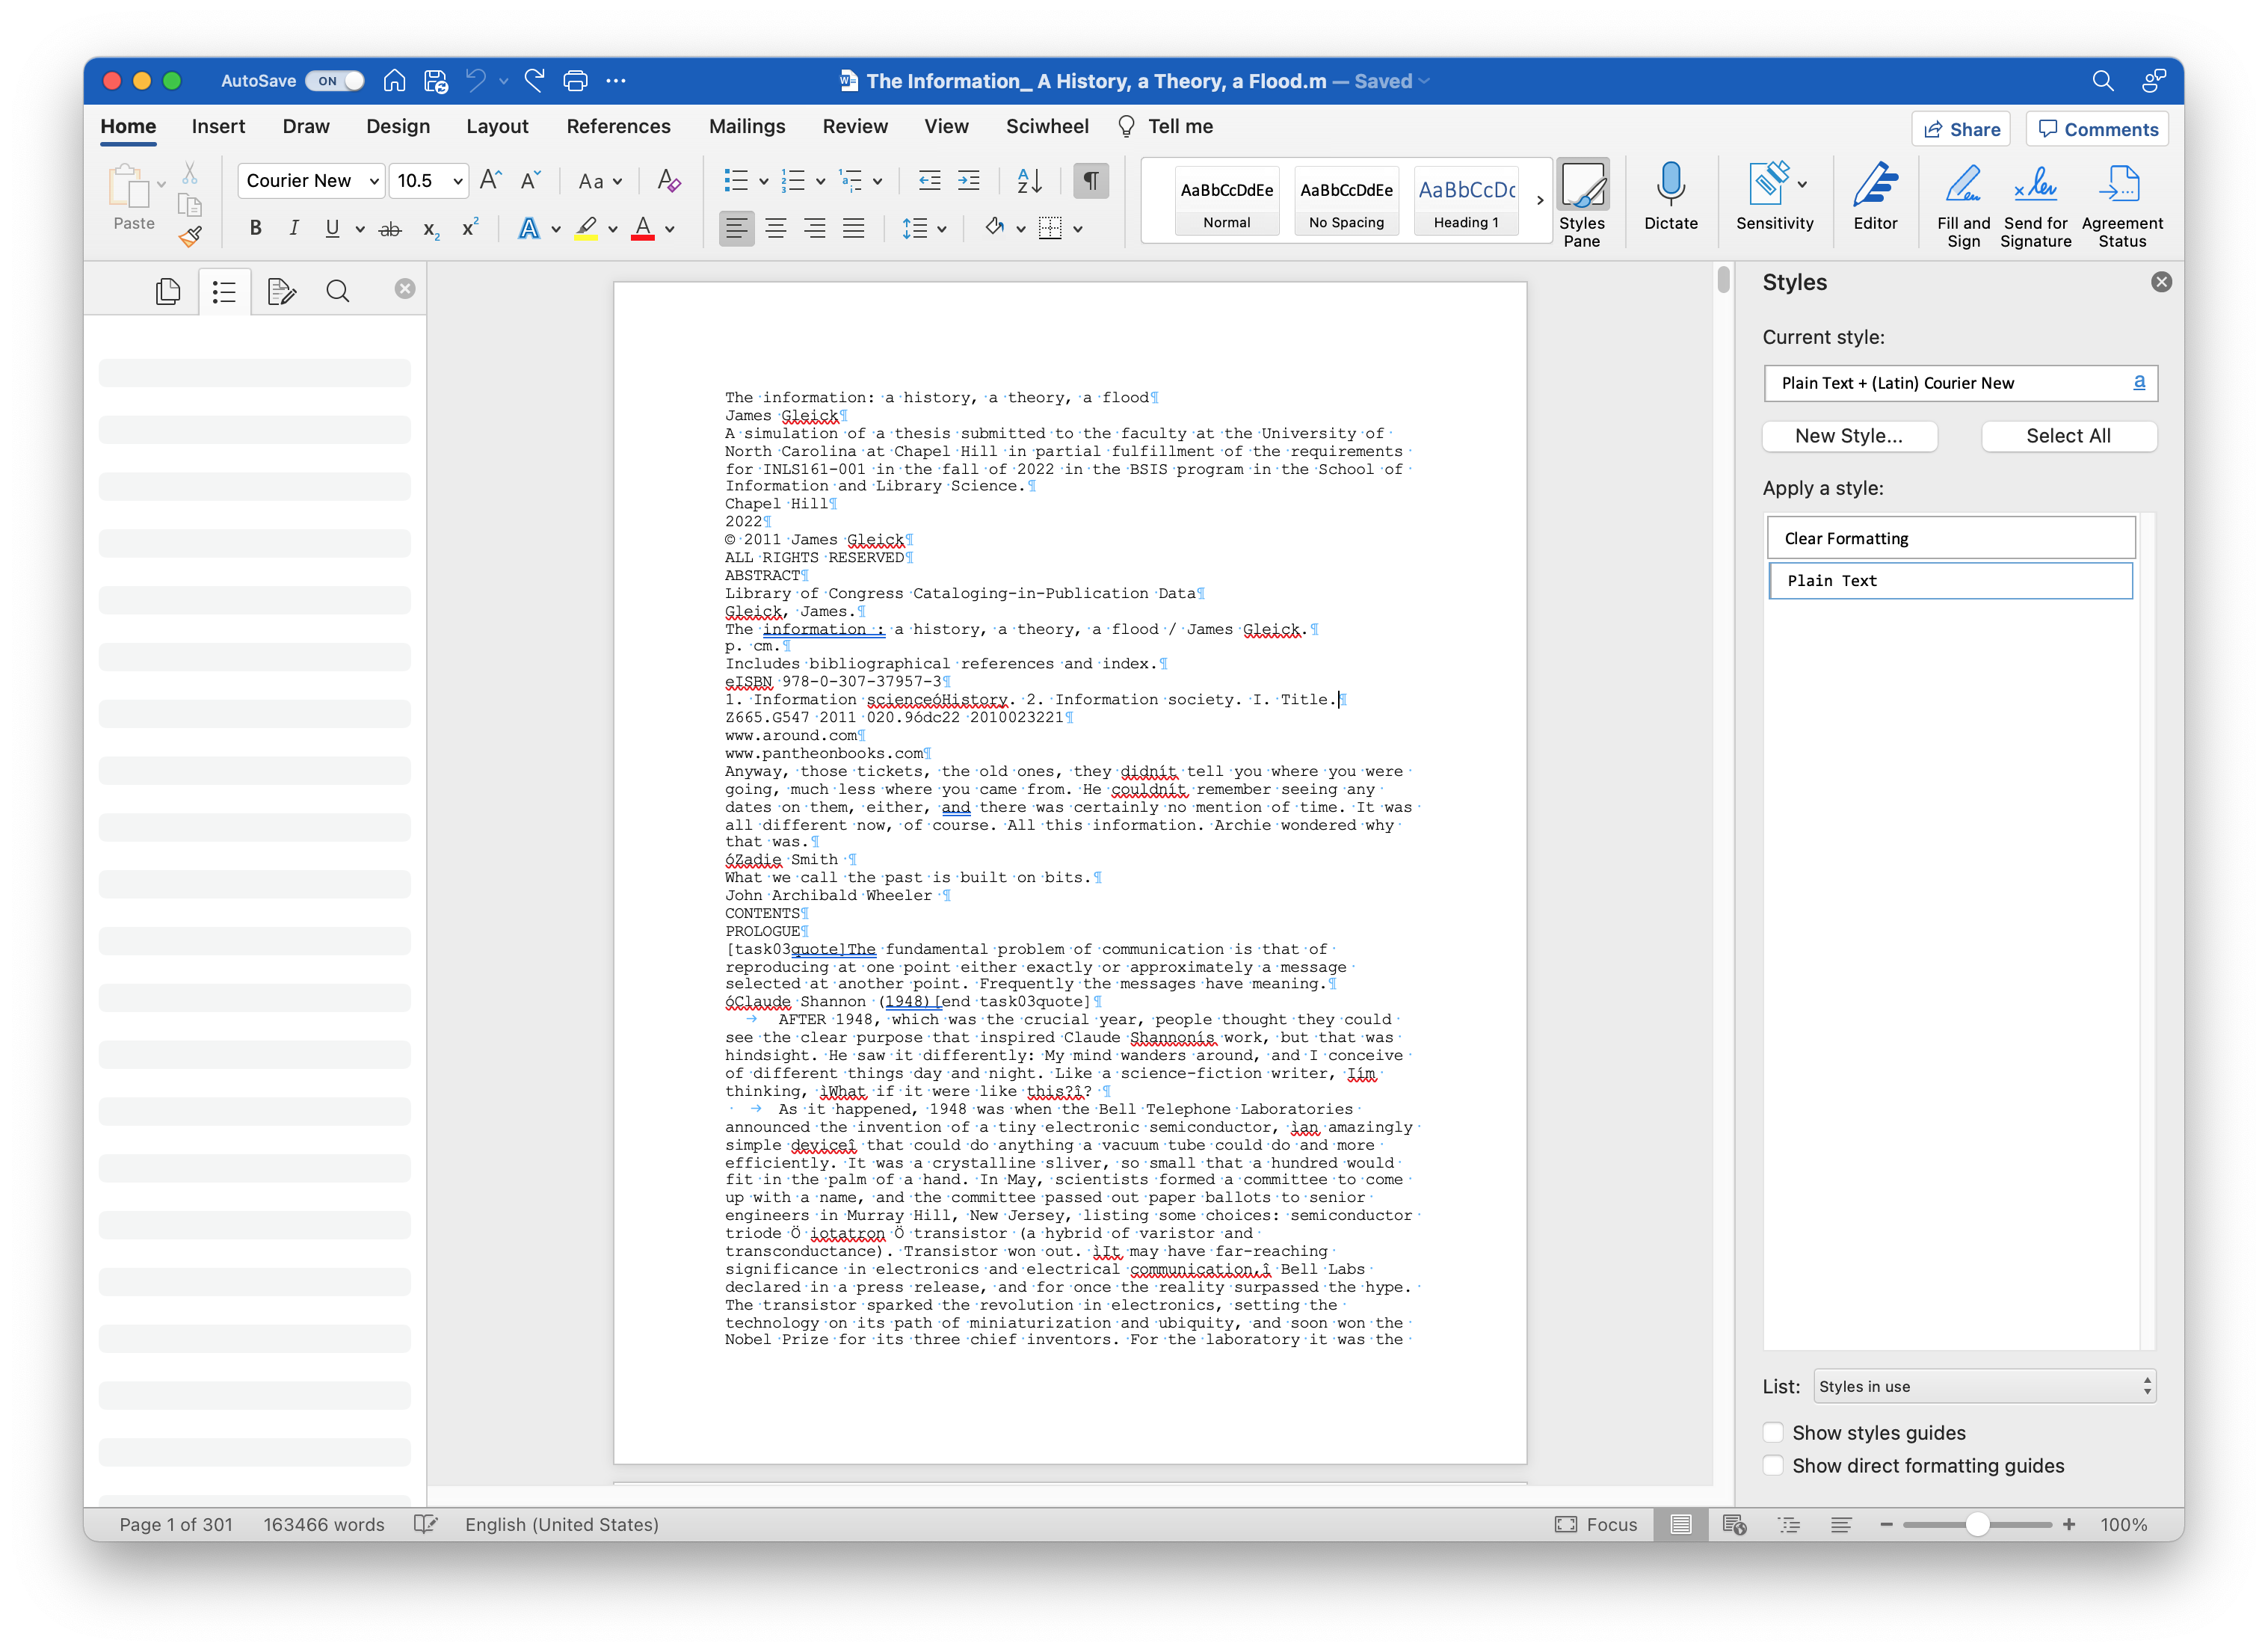 [MSWord saved as .docx on a Mac]